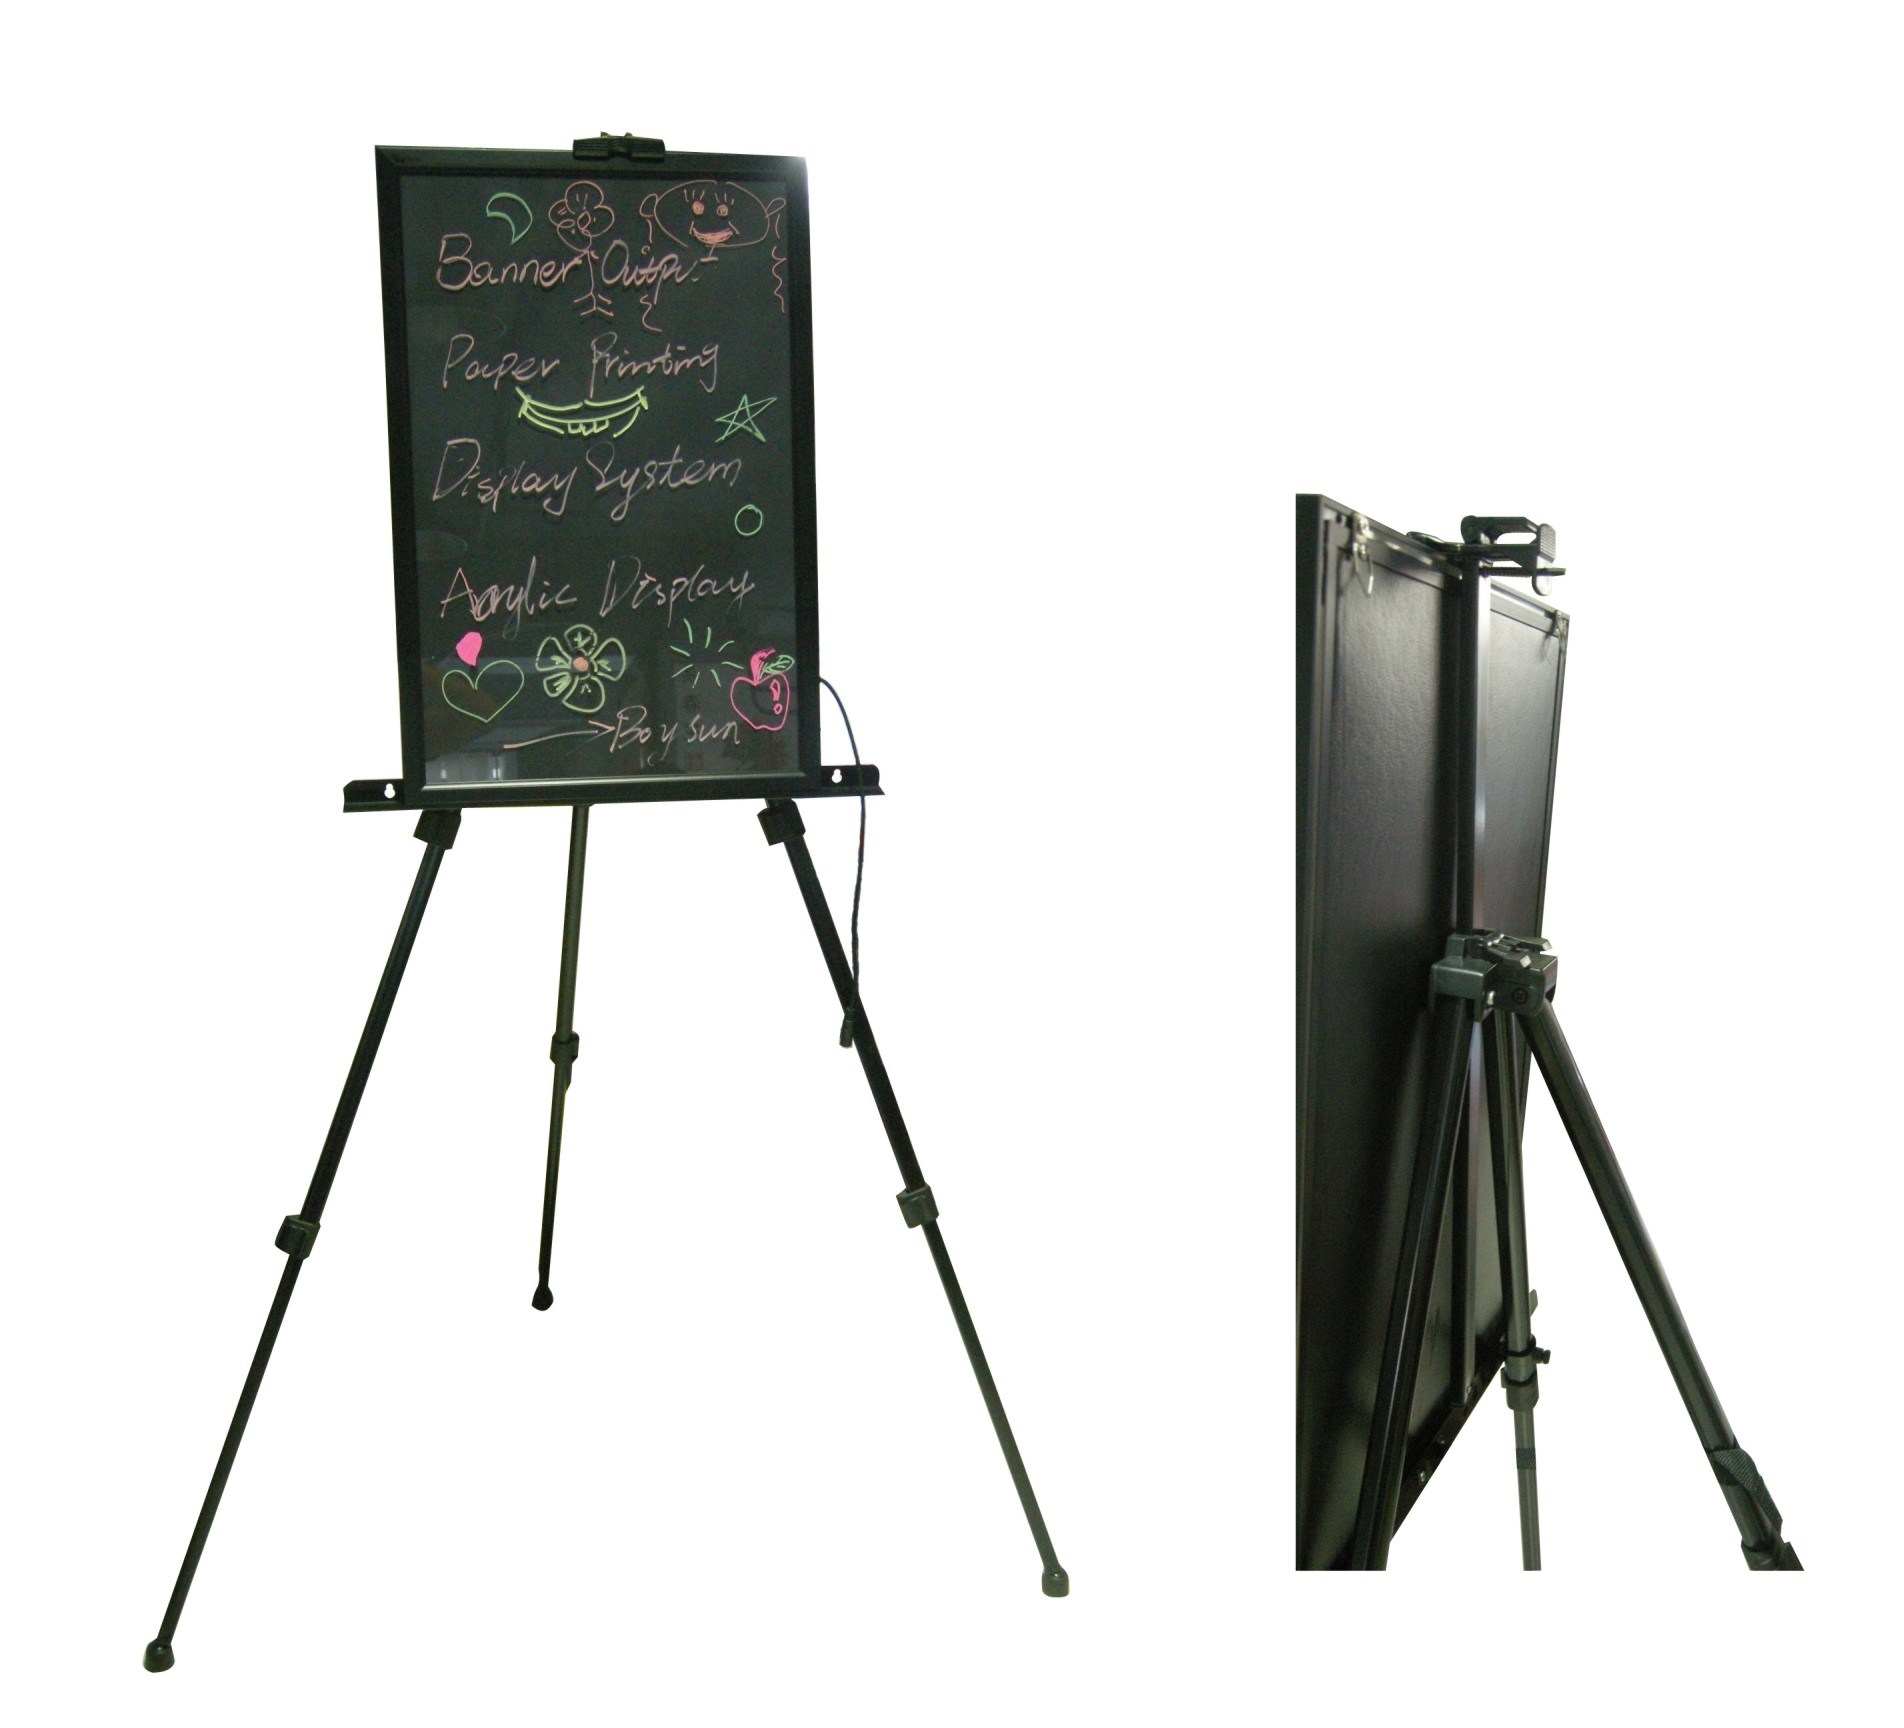 Display Stand (BS-P156)